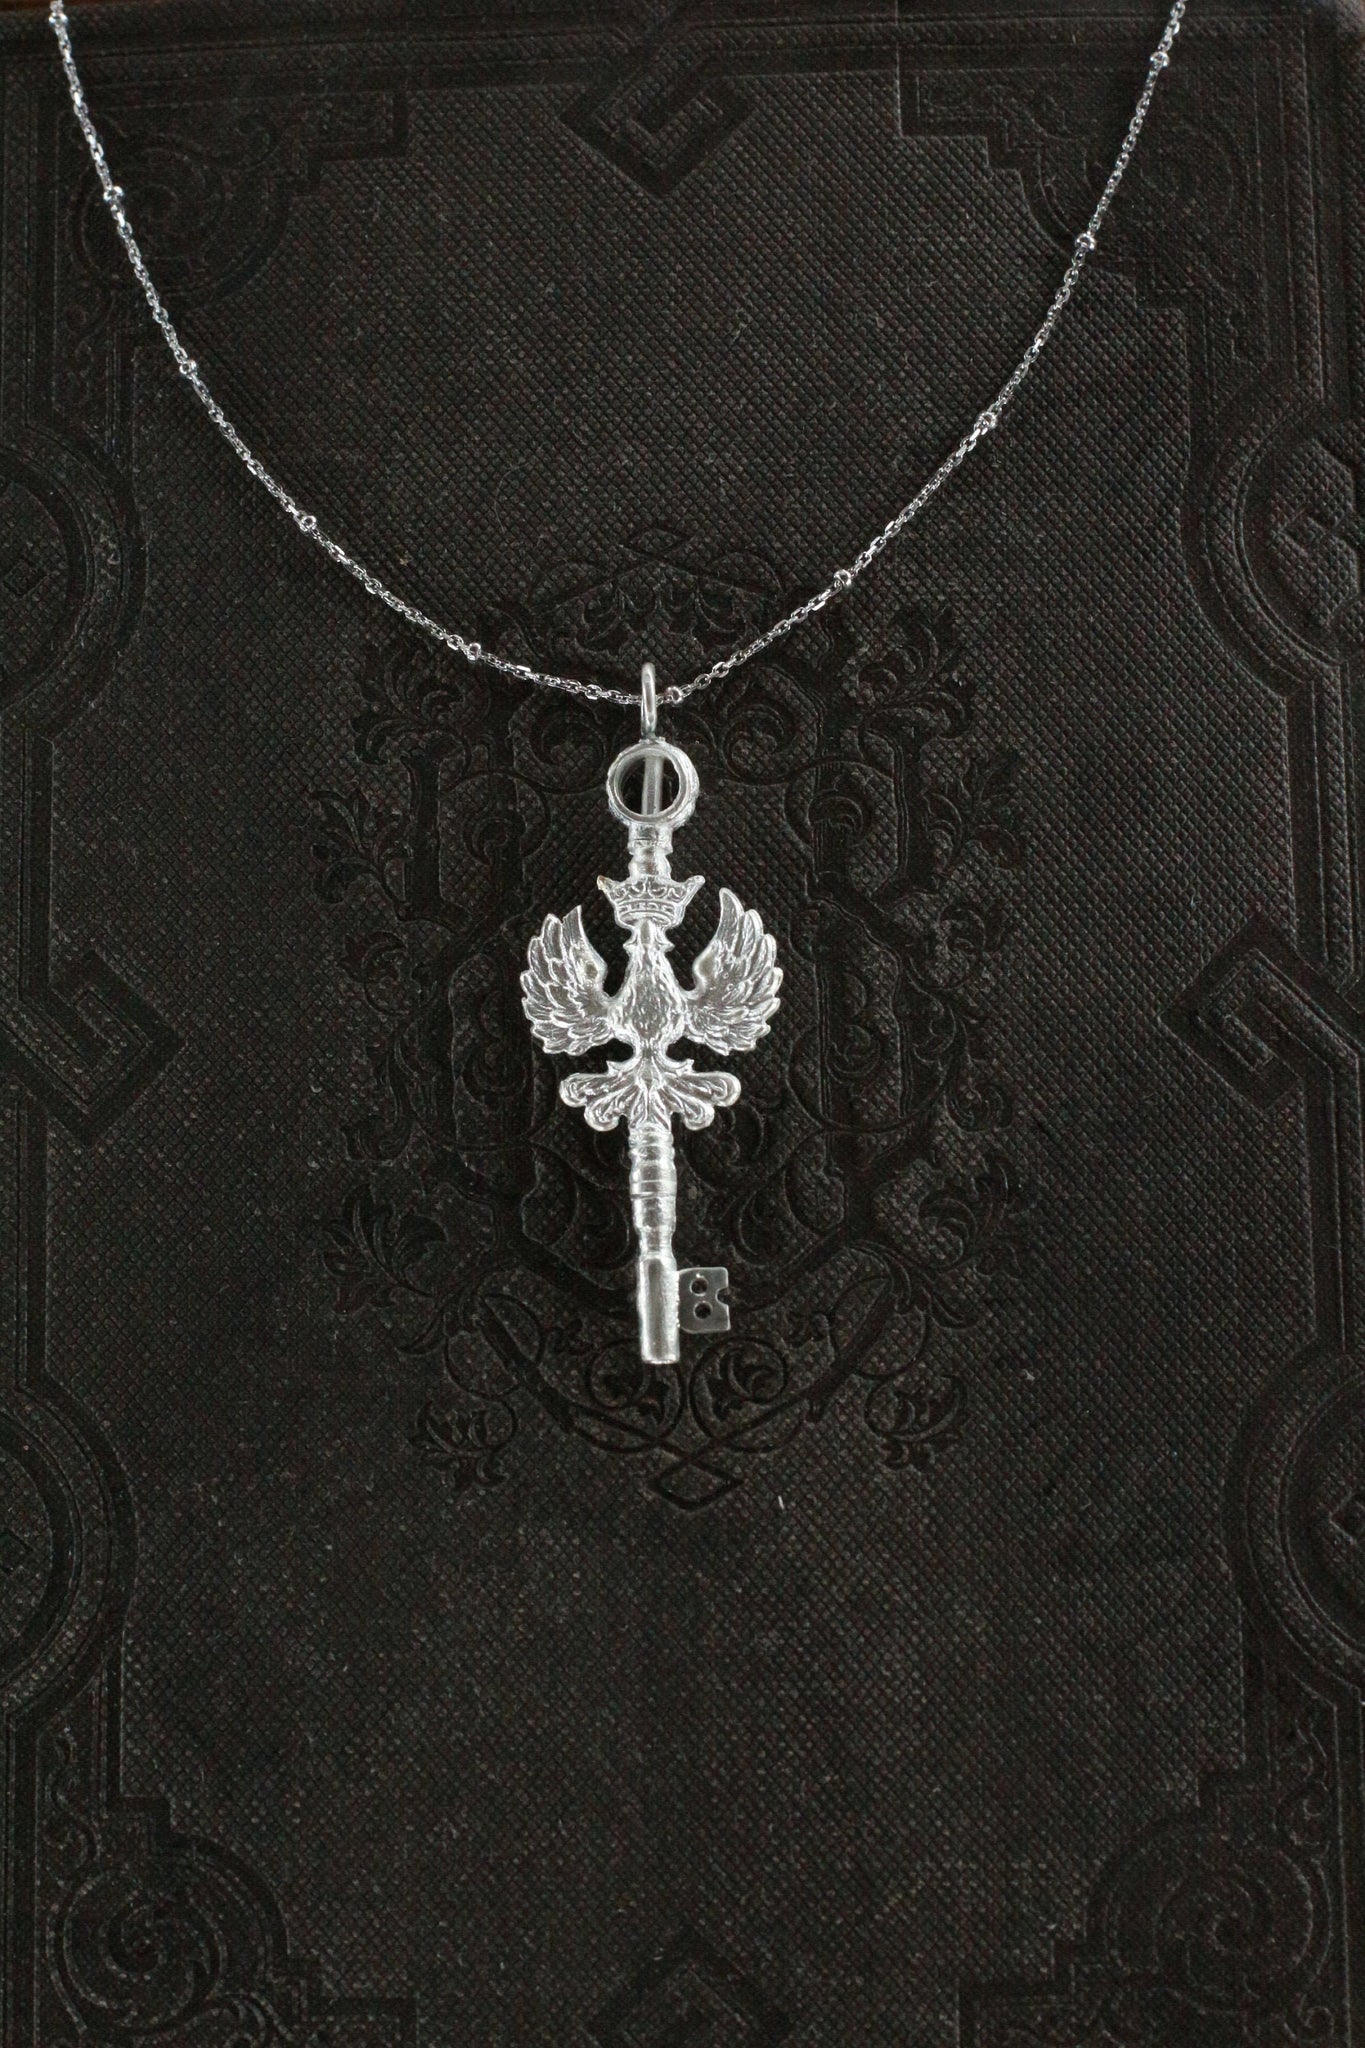 990 Sterling Silver Necklace W/Eagle Shape Key Pendant, 18" Neckline W/2" pendant, Gift For Her.